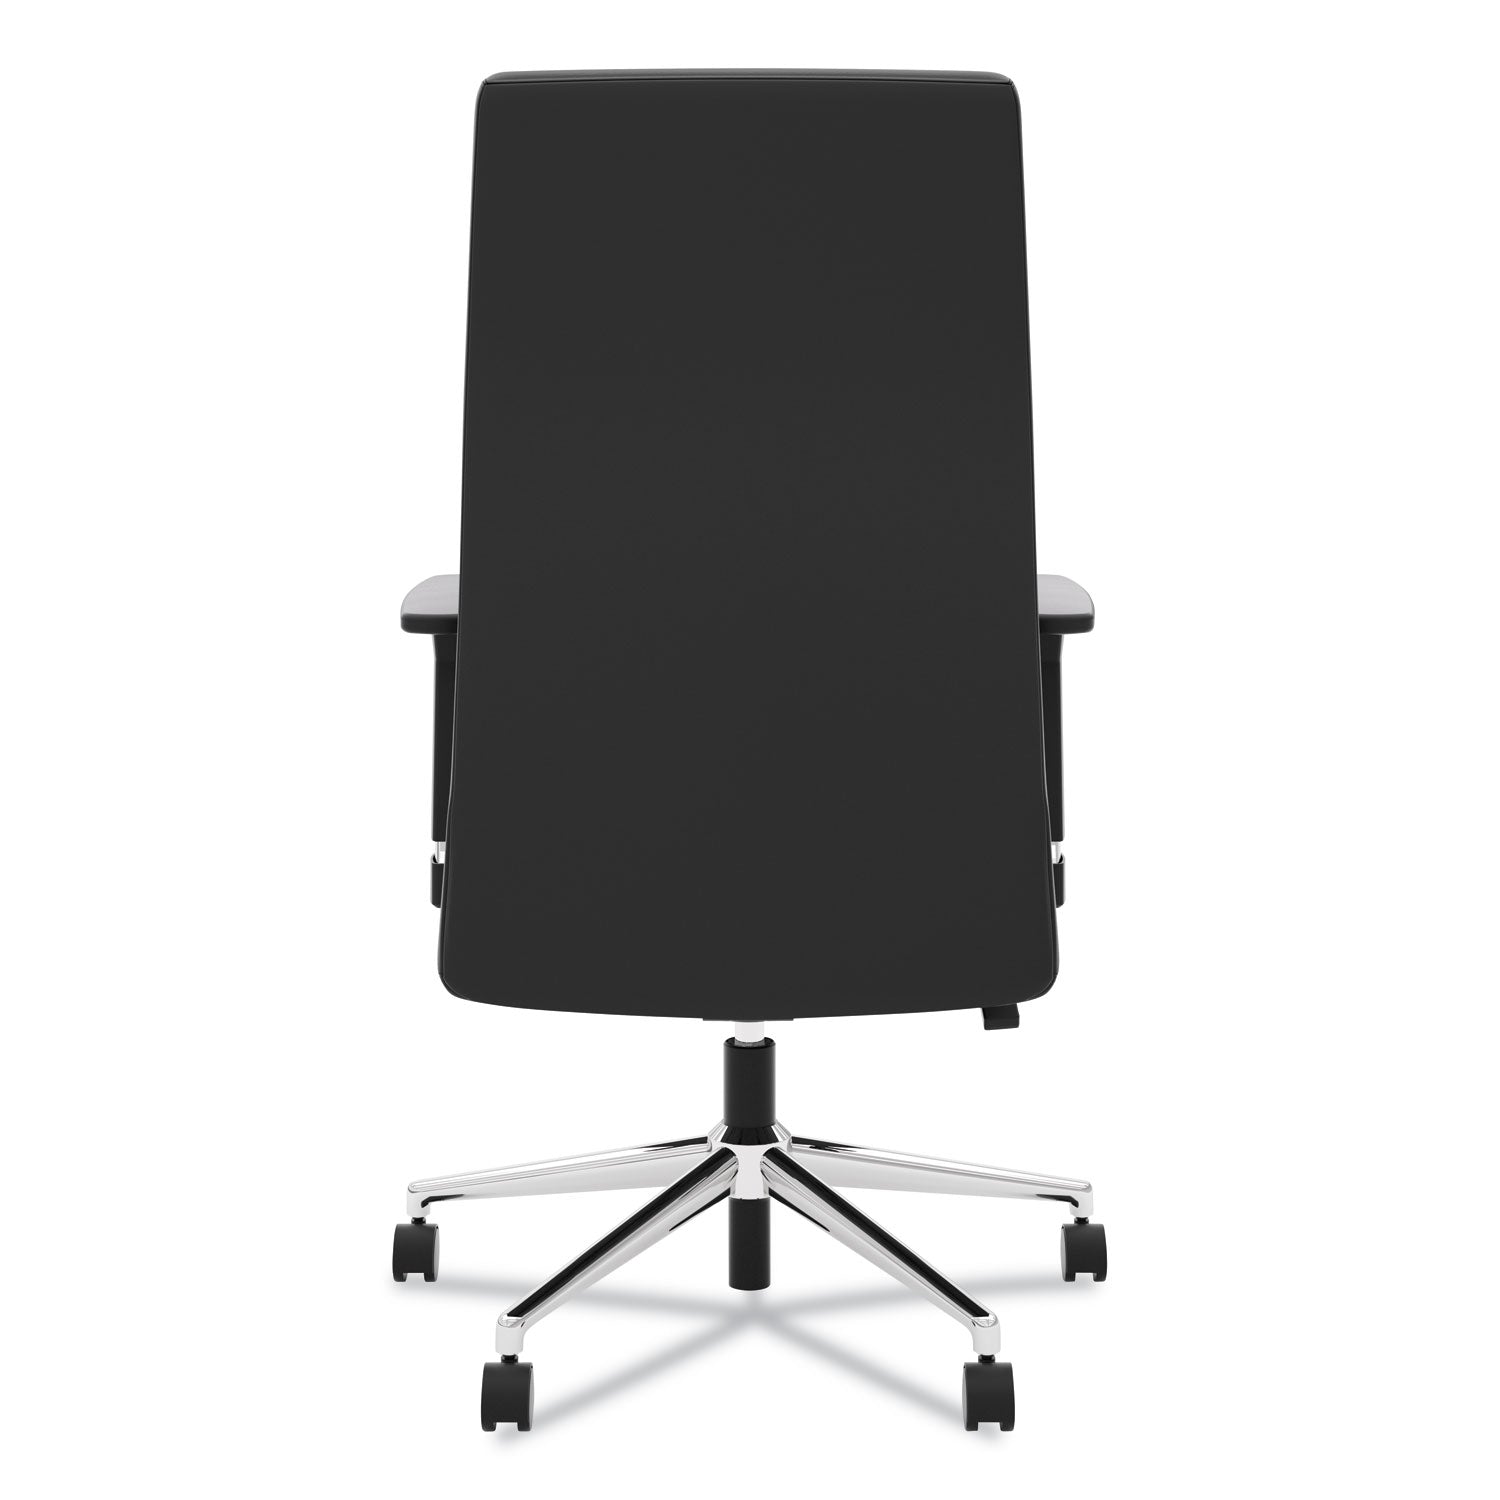 define-executive-high-back-leather-chair-supports-250-lb-17-to-21-seat-height-black-seat-back-polished-chrome-base_bsxvl108sb11 - 5